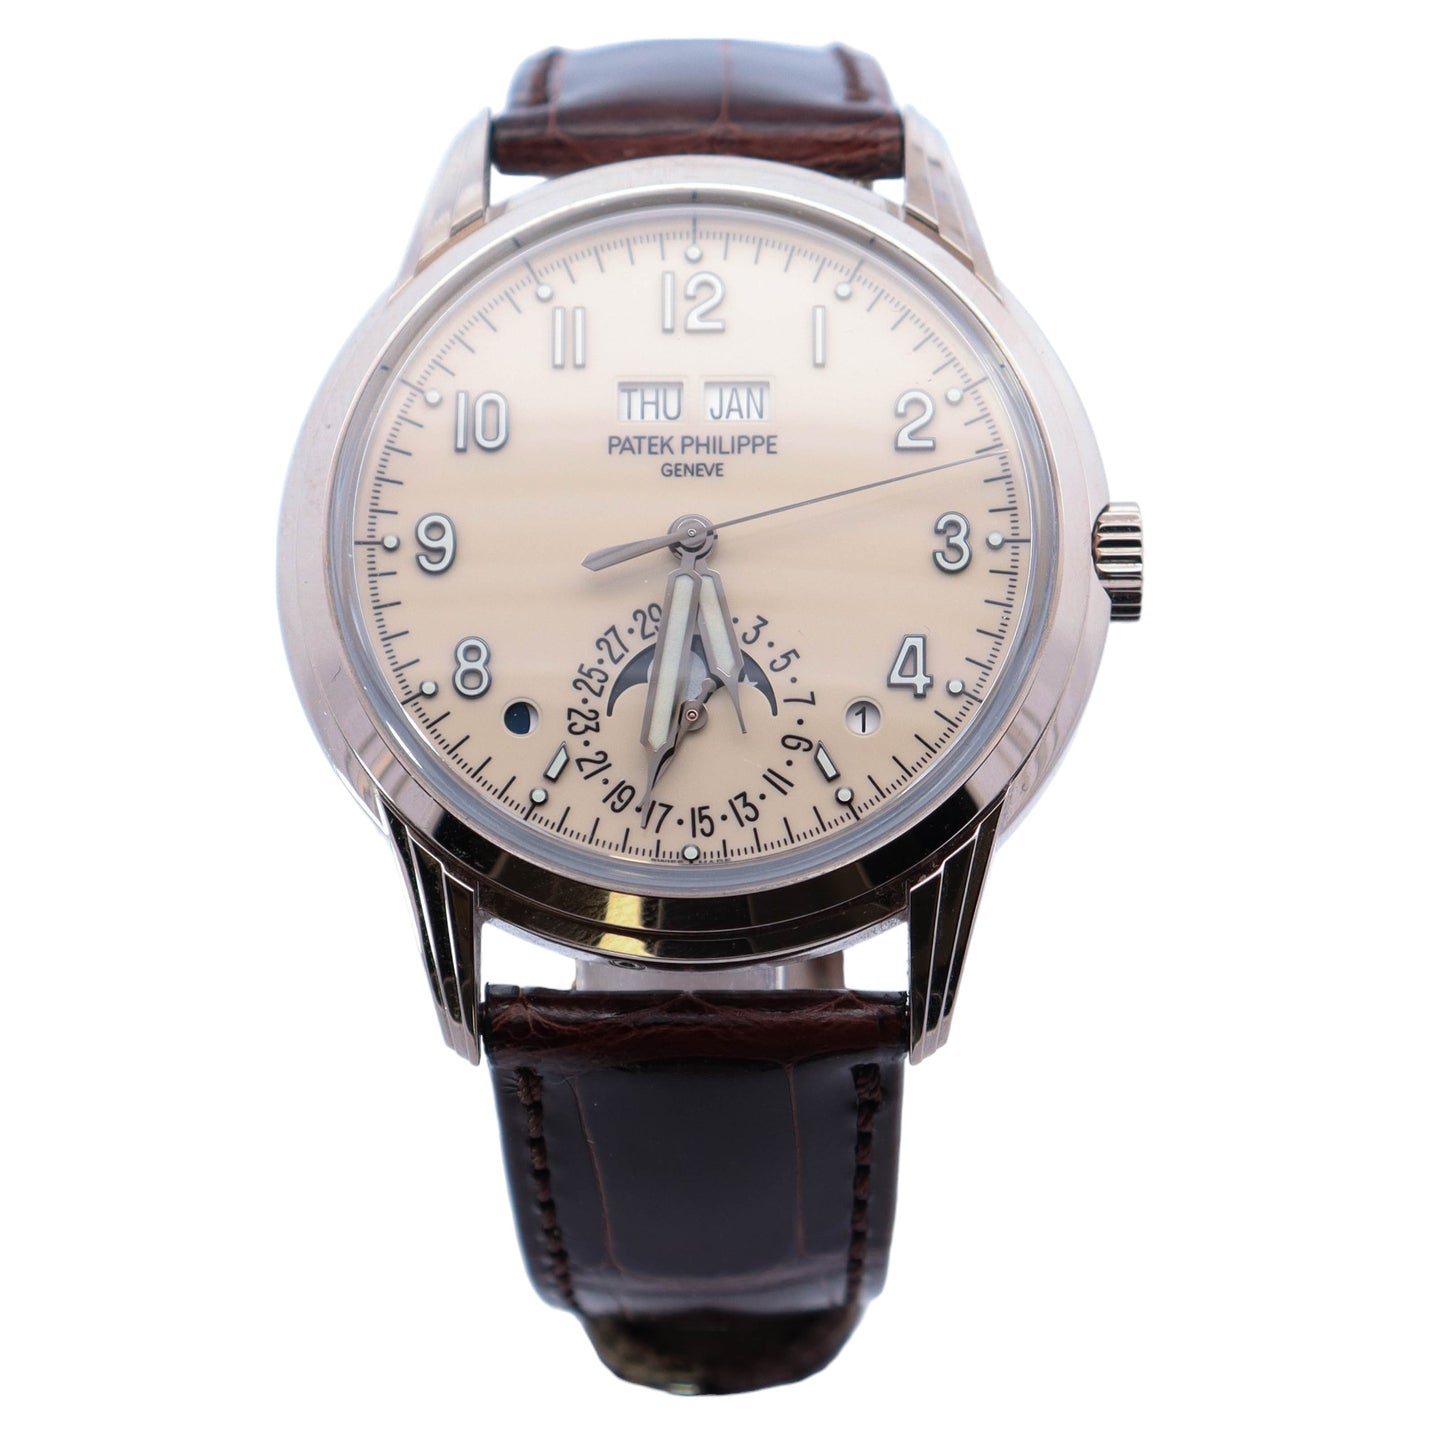 Patek Philippe Grand Complications Perpetual Calendar White Gold 40mm Cream Arabic Dial Watch Reference# 5320G-001 - Happy Jewelers Fine Jewelry Lifetime Warranty